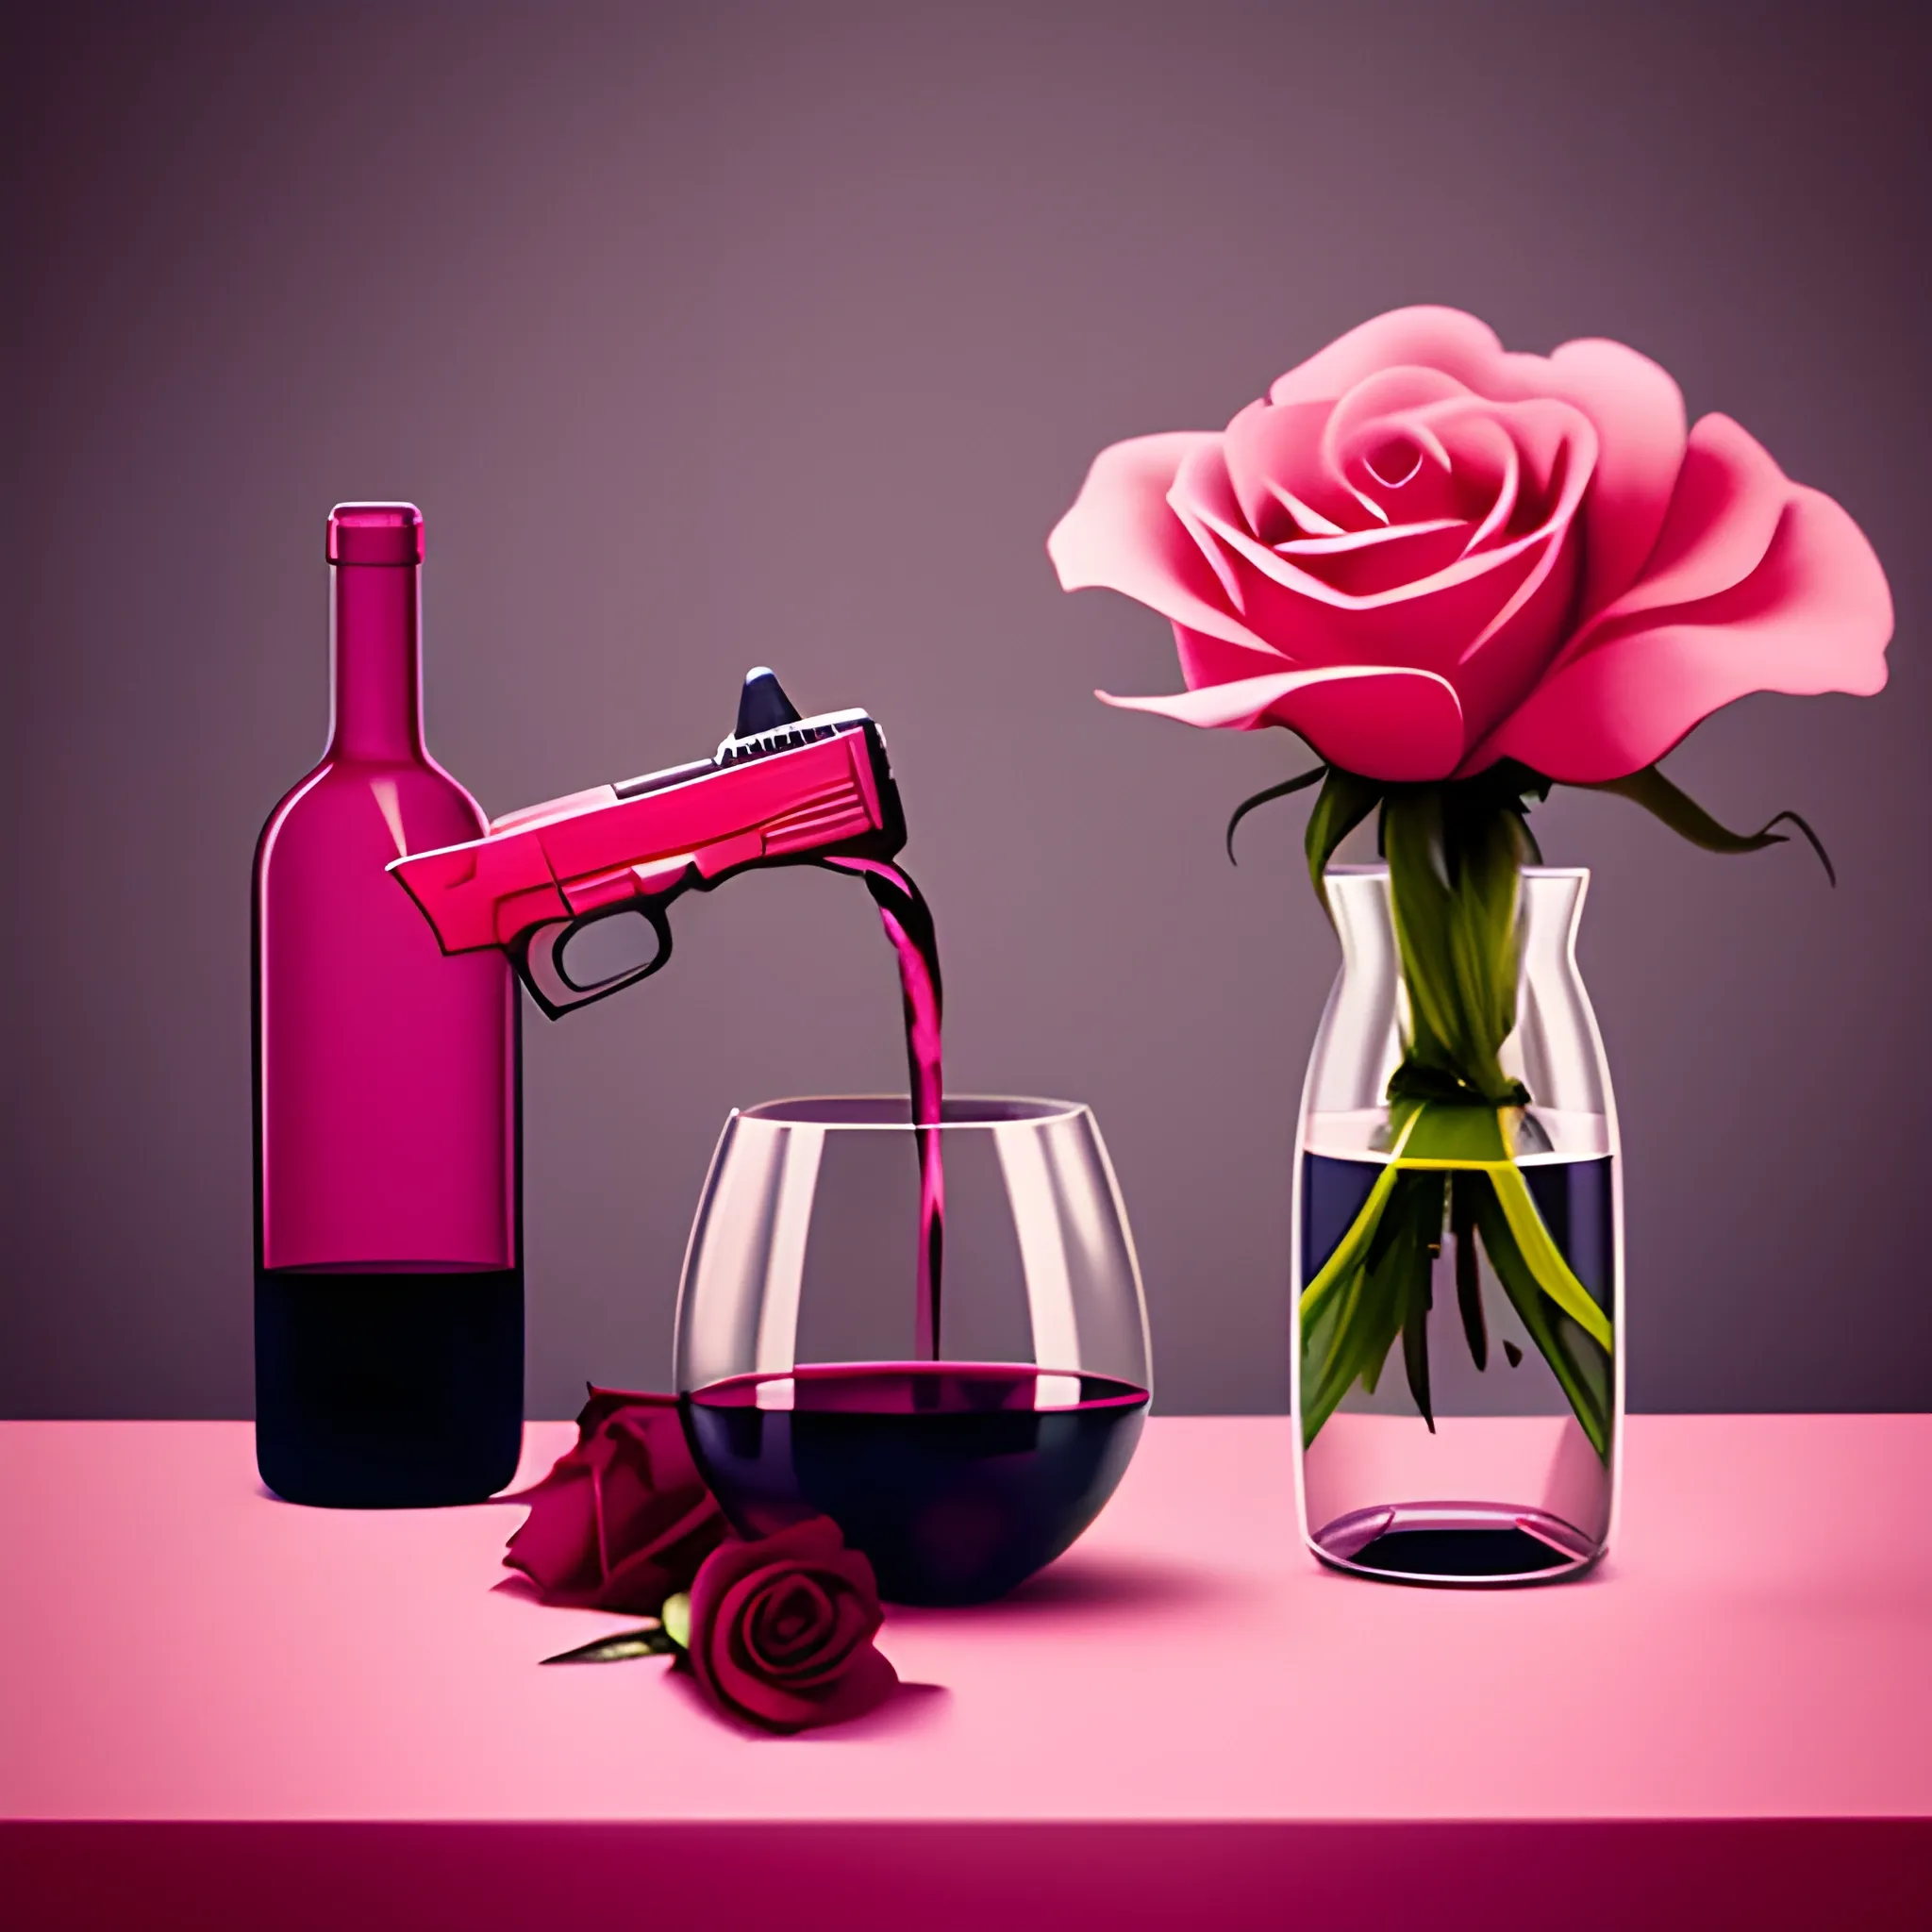 minimilist aesthetic art,wine pouring by pink bottle in the glass,on the table ,with a red rose, and a pink gun on the table
